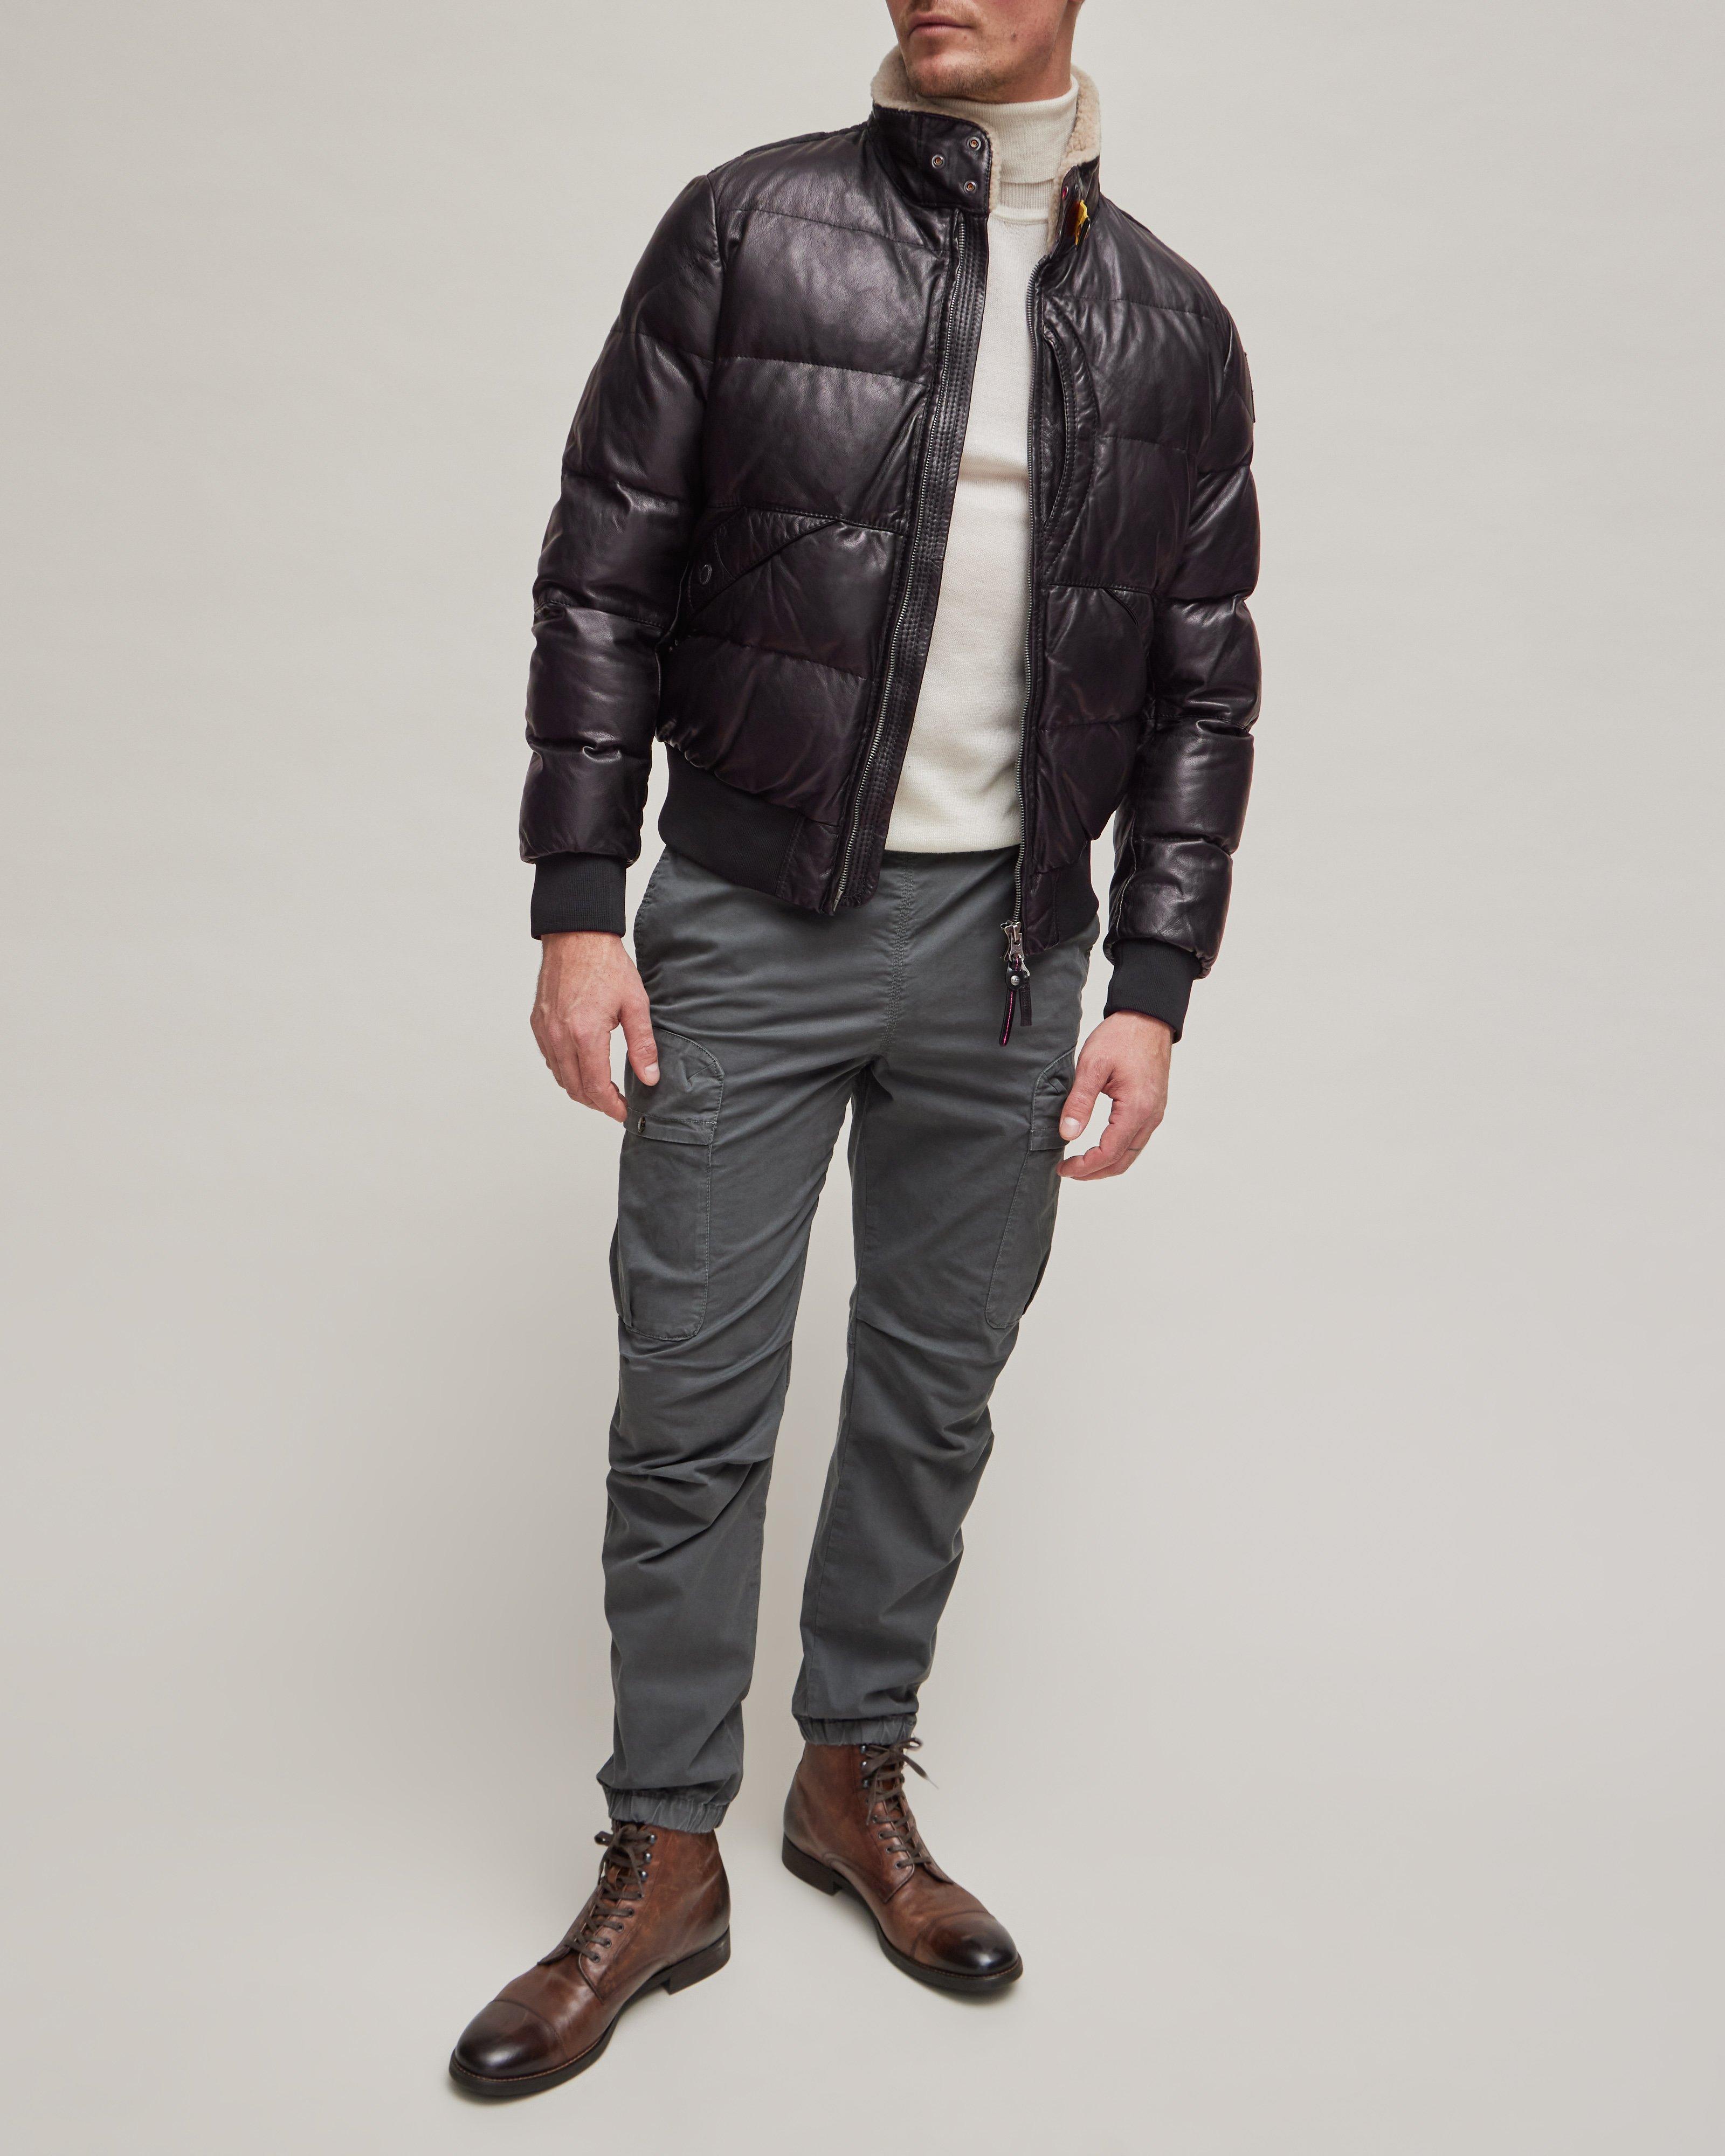 Alf Leather Puffer Jacket image 5